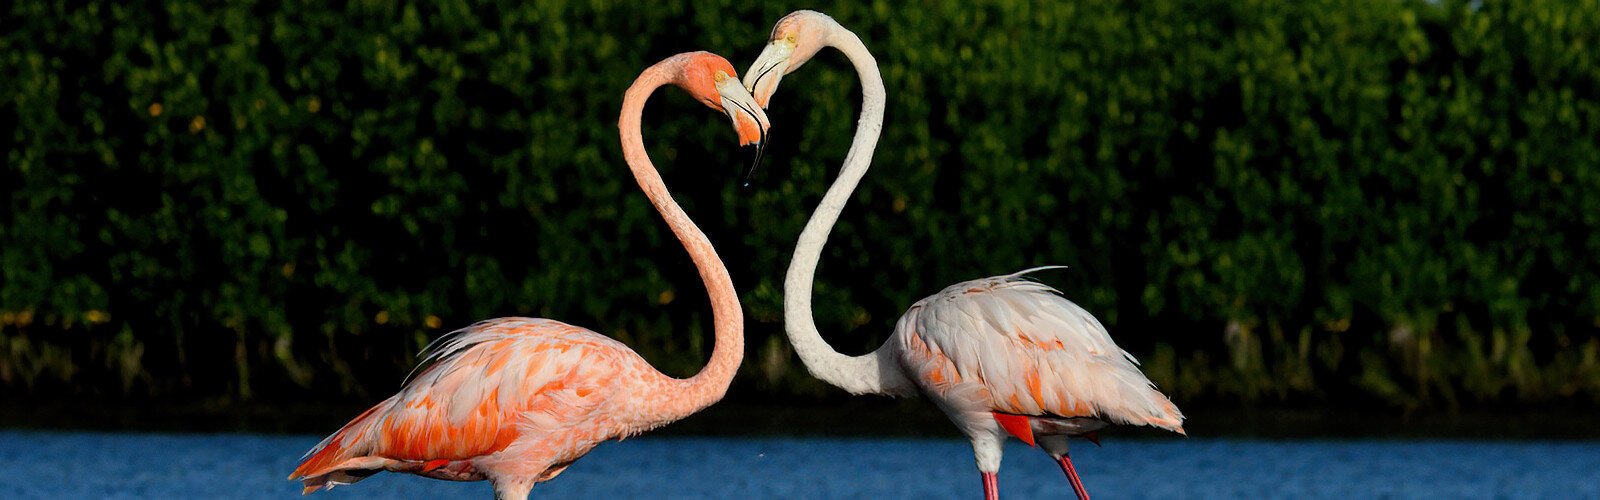 Flamingos are said to be monogamous and the heart shape this pair formed with their necks is a beautiful display of their affection for each other.